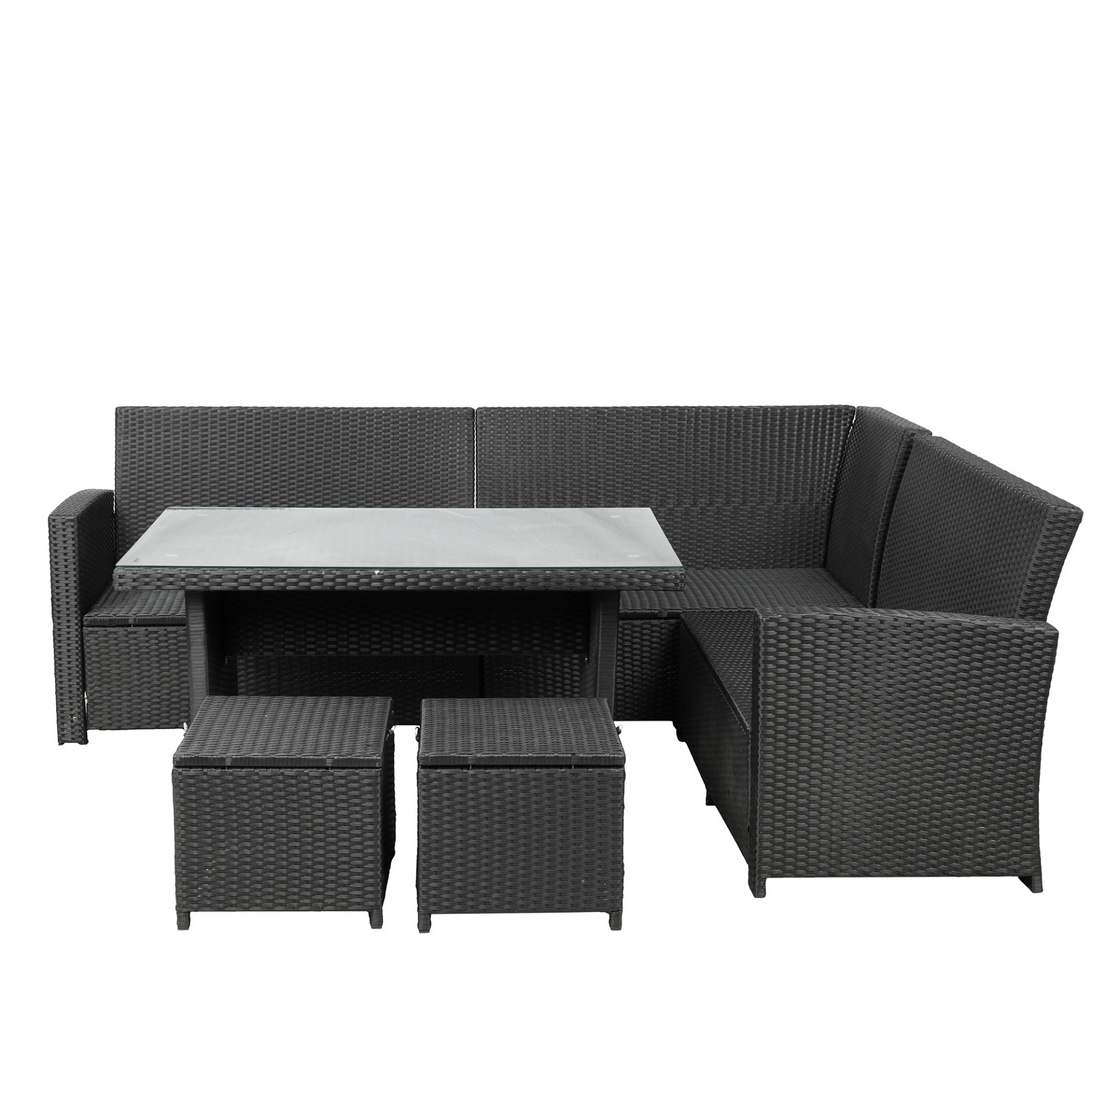 6-Piece Patio Furniture Set Outdoor Sectional Sofa with Glass Table, Ottomans for Pool, Backyard, Lawn (Black) - Stylish and Durable